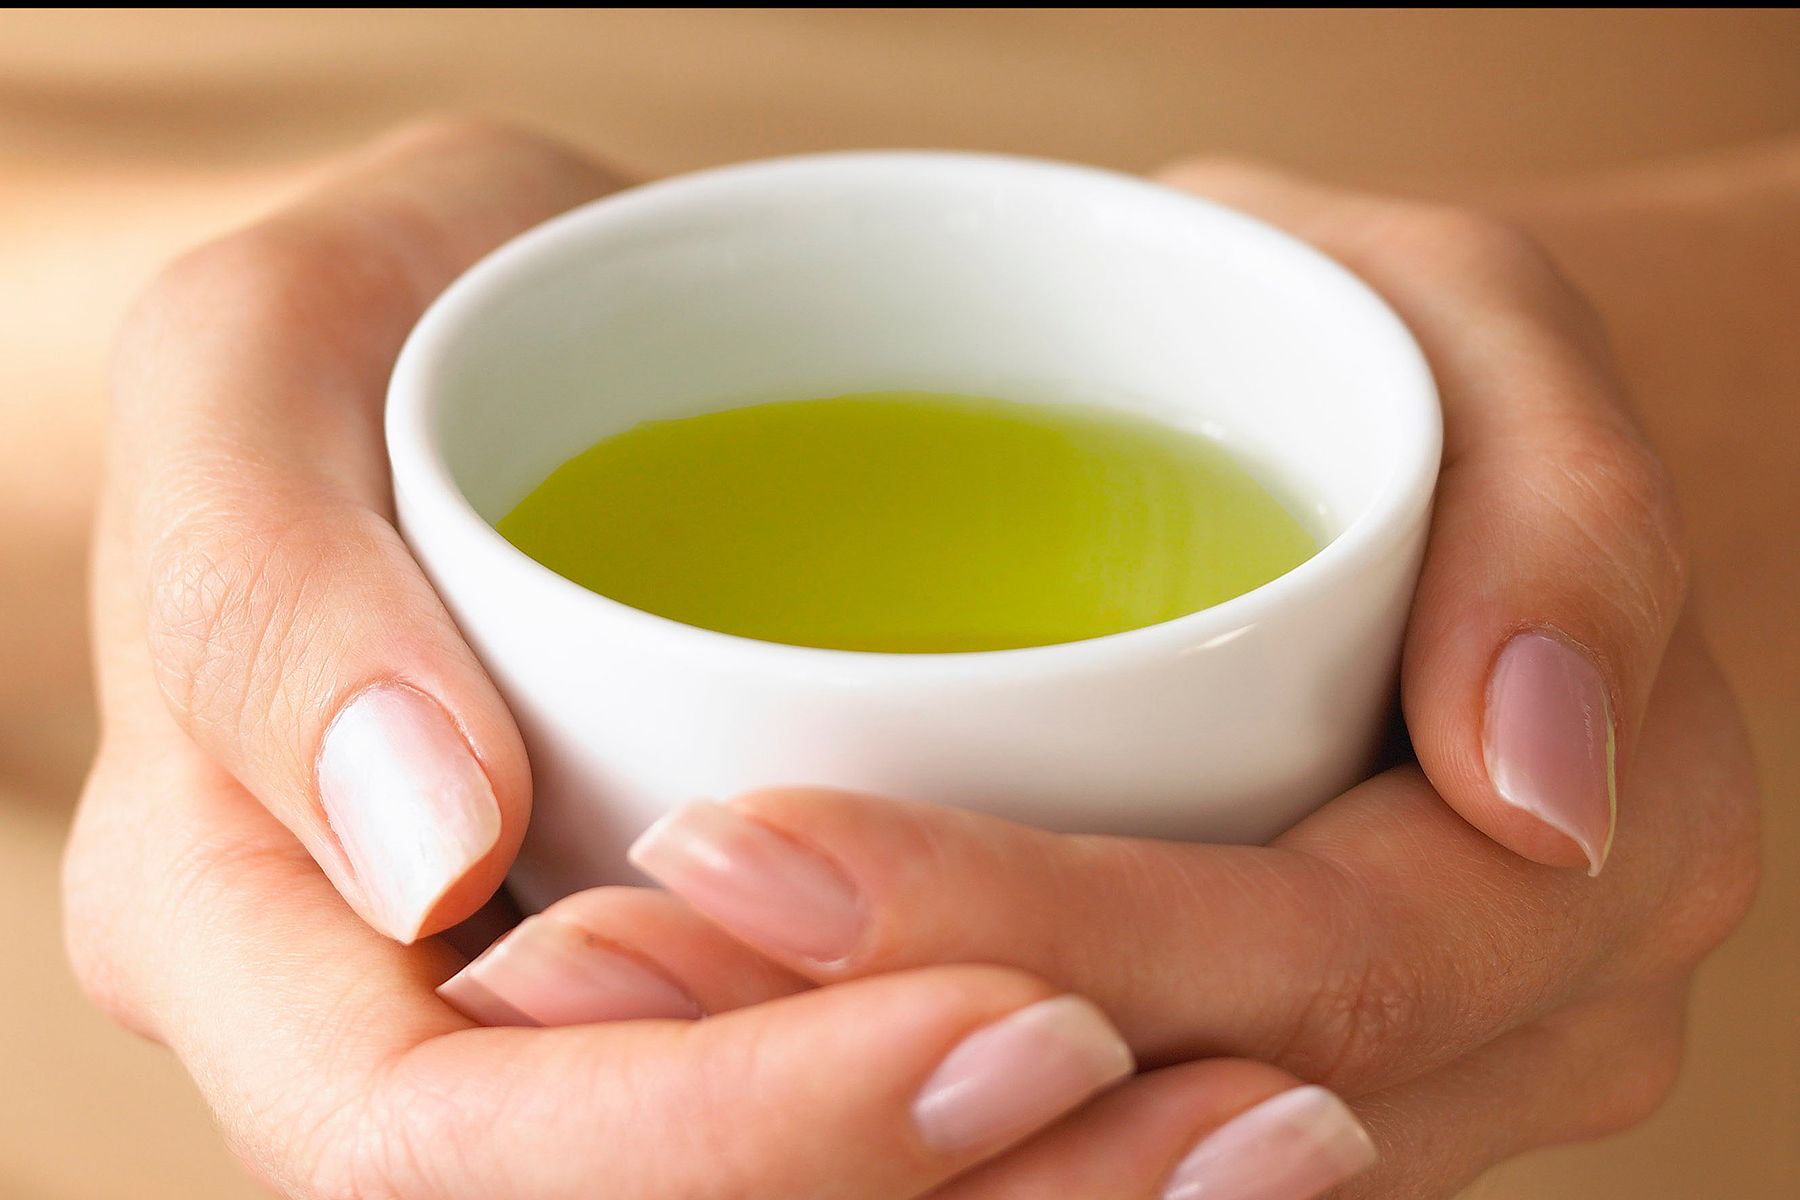 hands holding cup of green tea